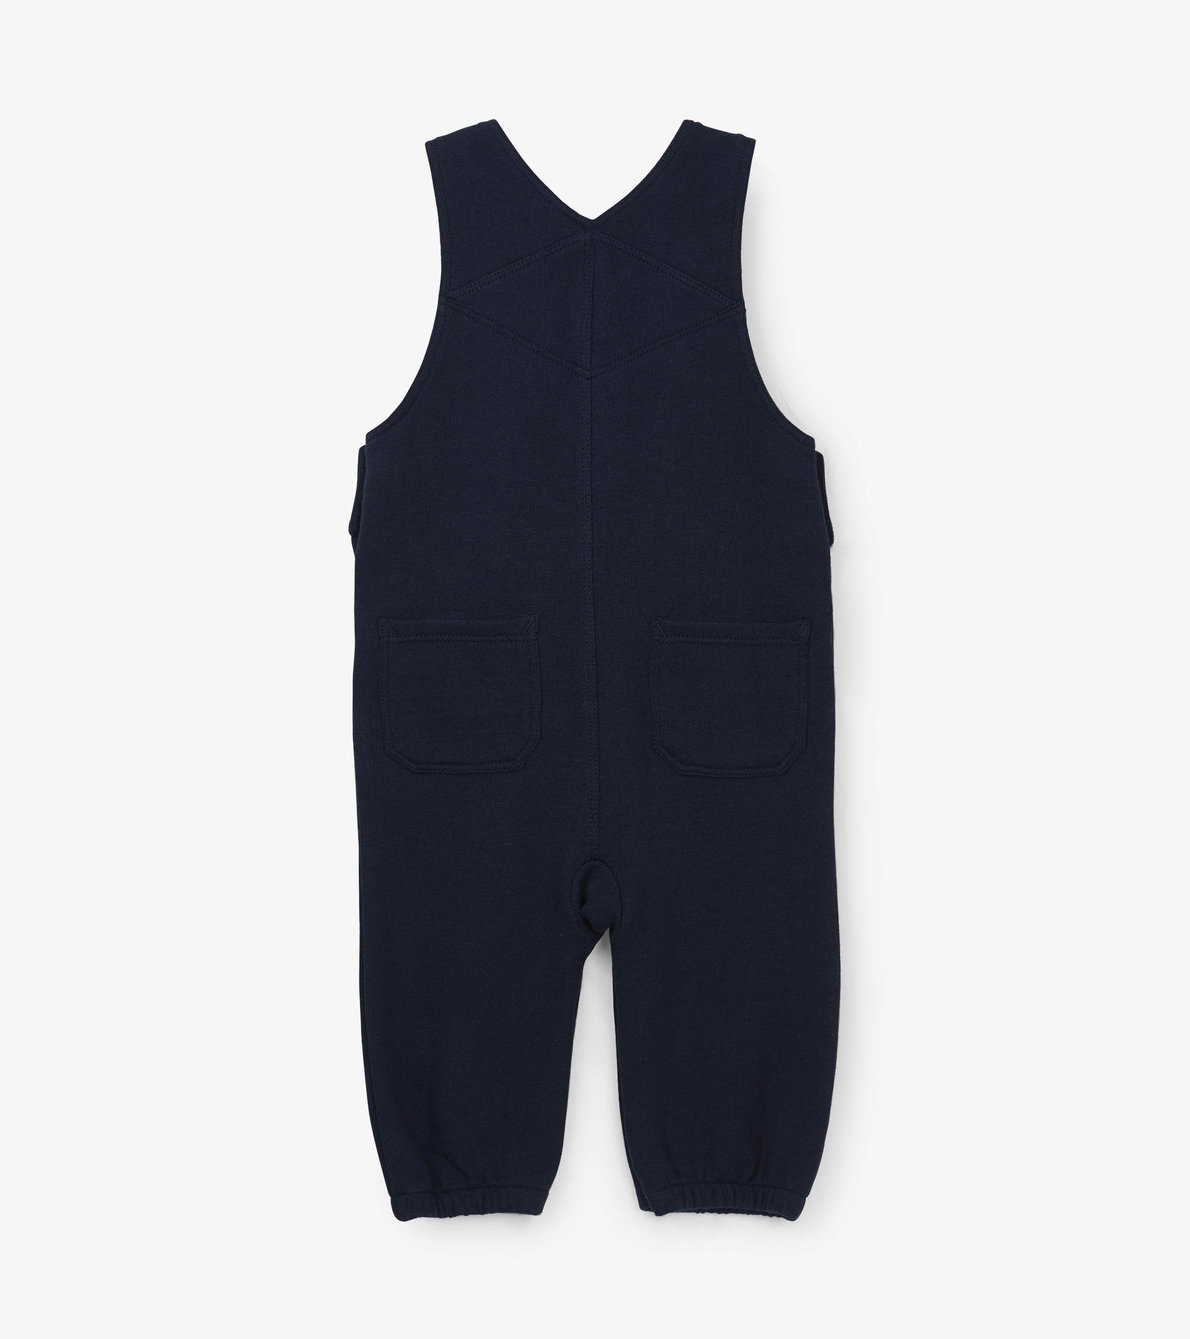 View larger image of Navy Knit Baby Overalls